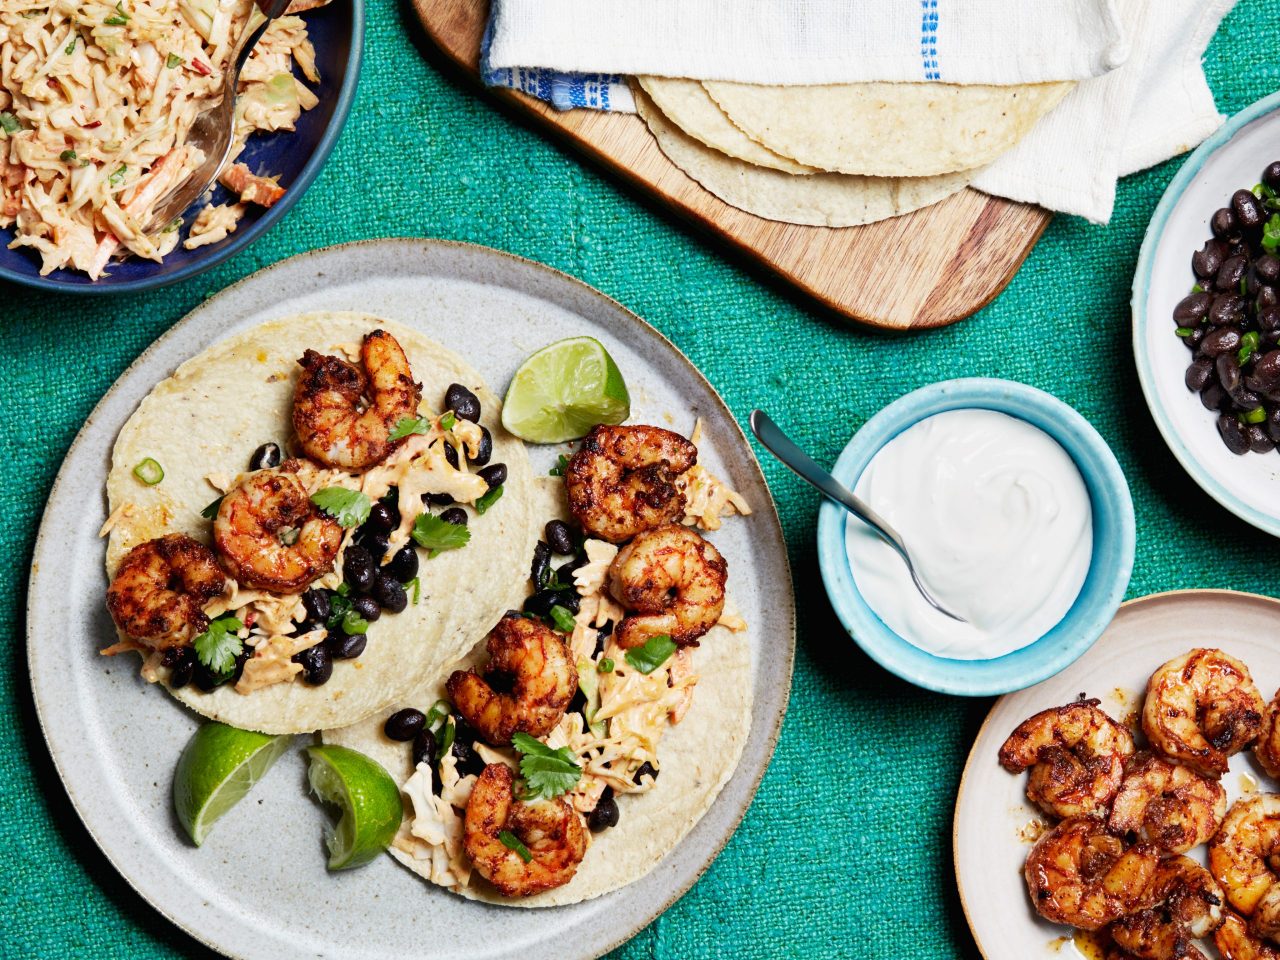 Food Network Kitchen's 15-Minute Shrimp Tacos with Spicy Chipotle Slaw.